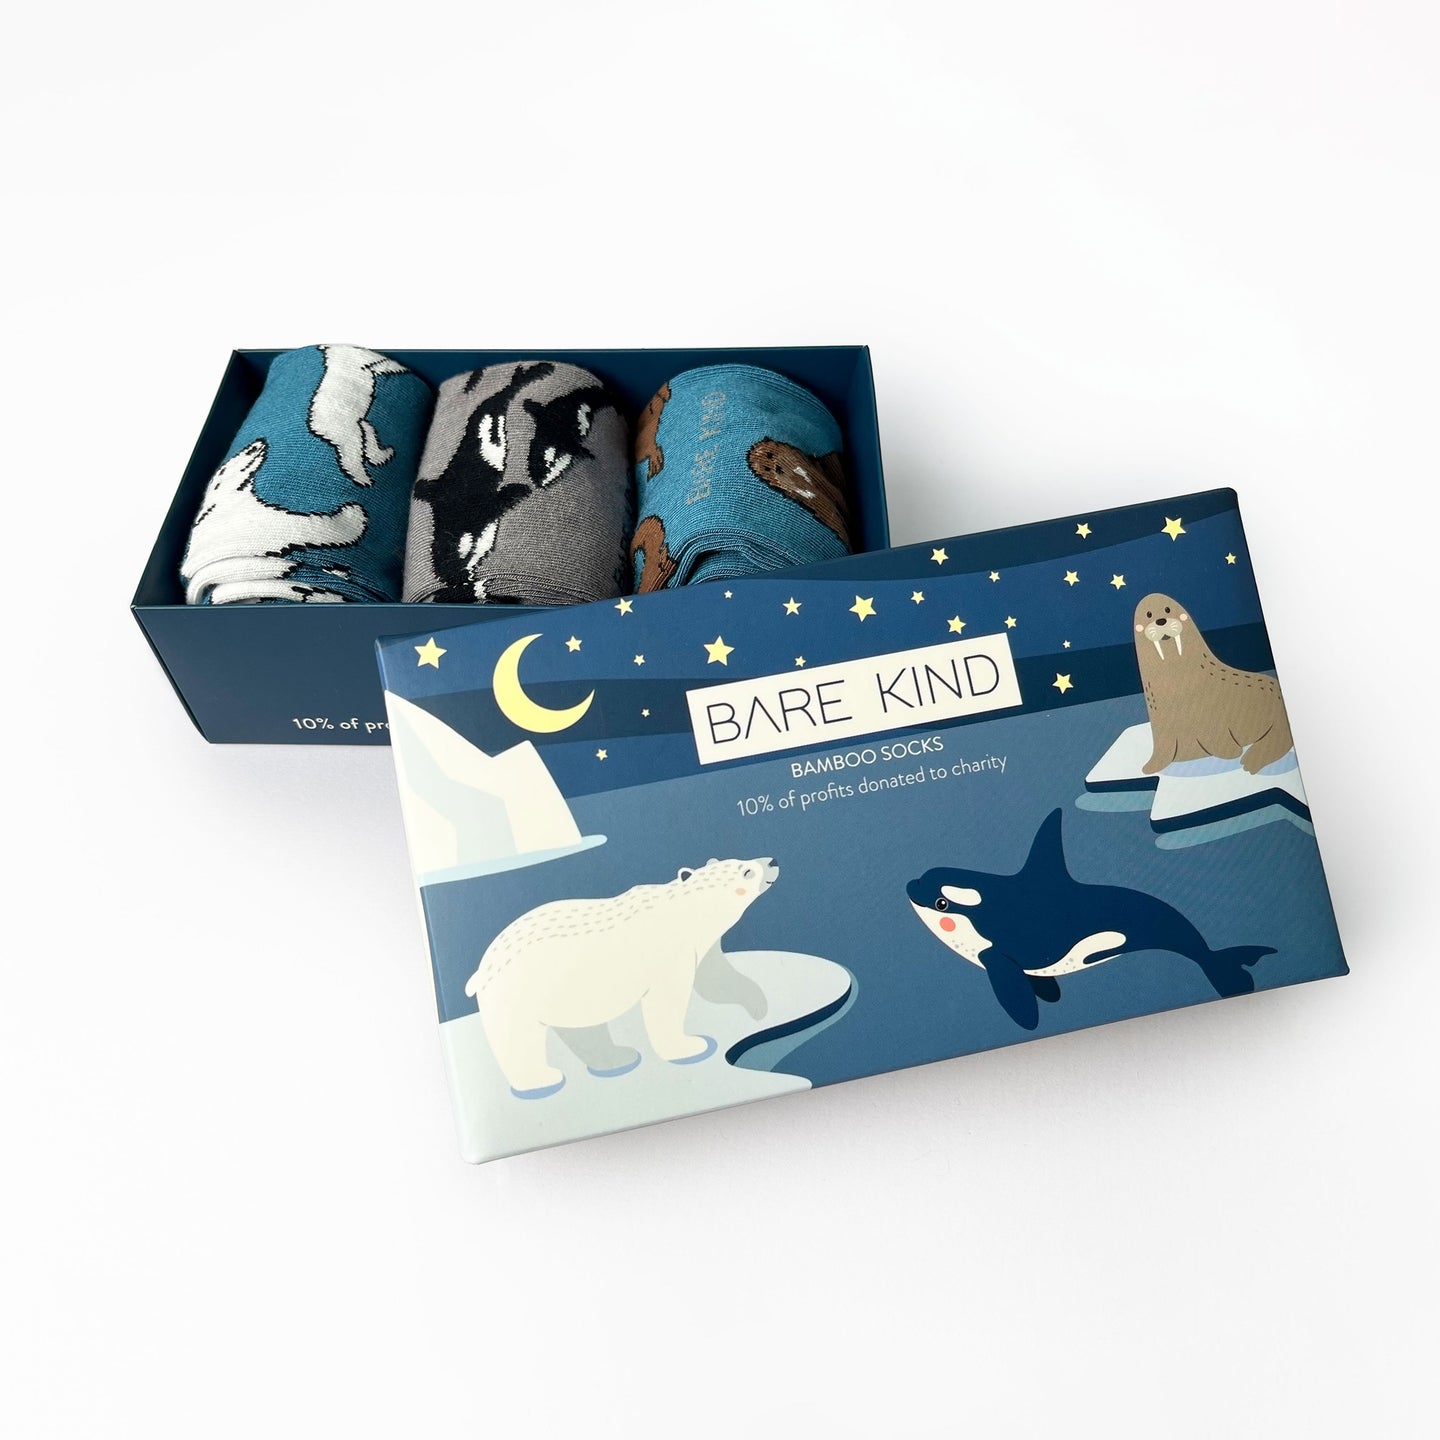 Arctic gift box made from 100% recyclable packaging . This box featured polar bear, orca and walrus socks